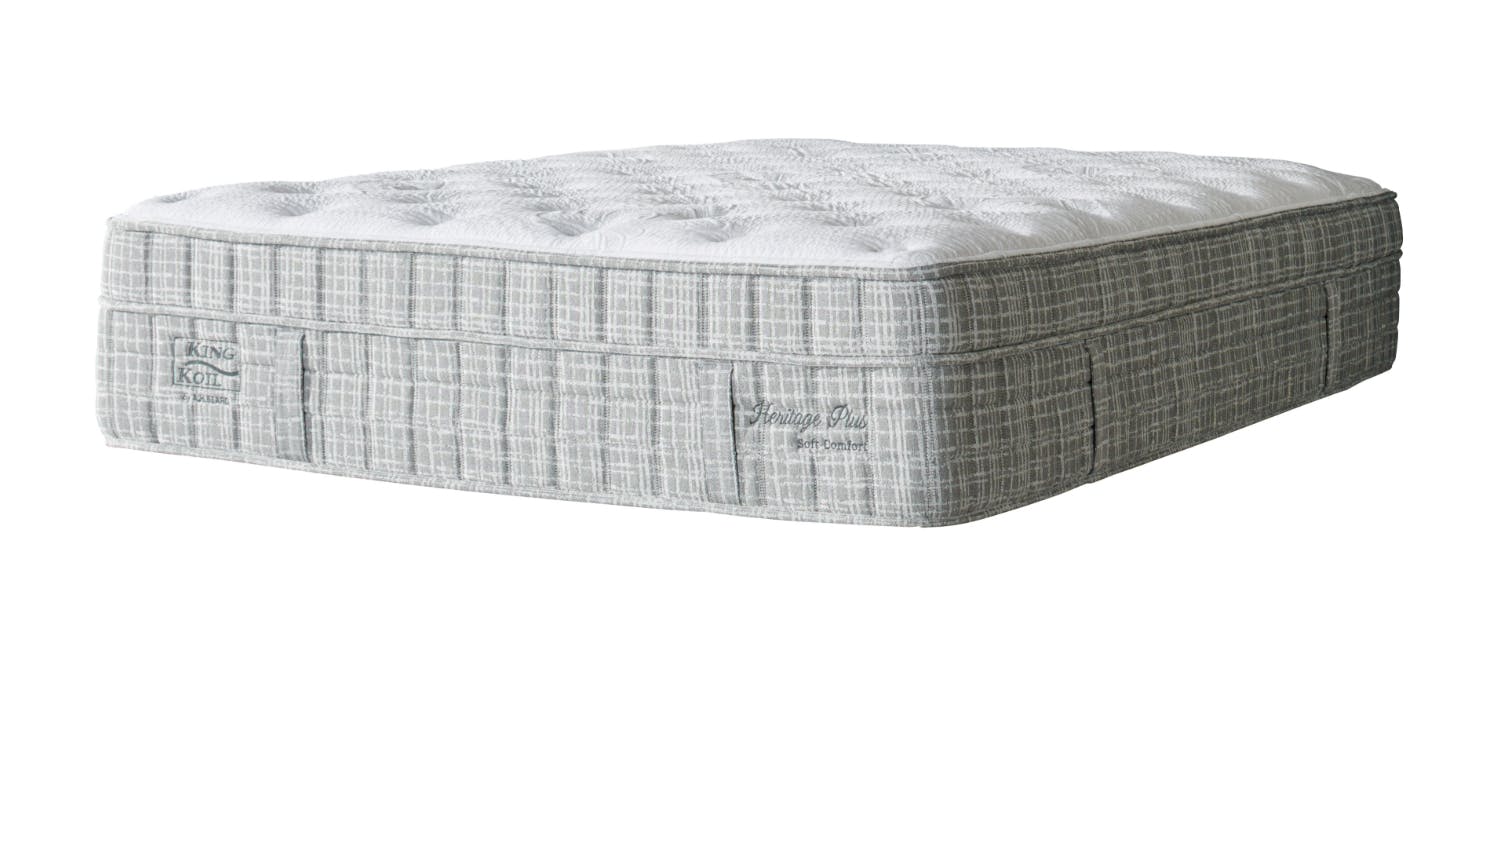 Heritage Plus Soft Extra Long Single Mattress by King Koil